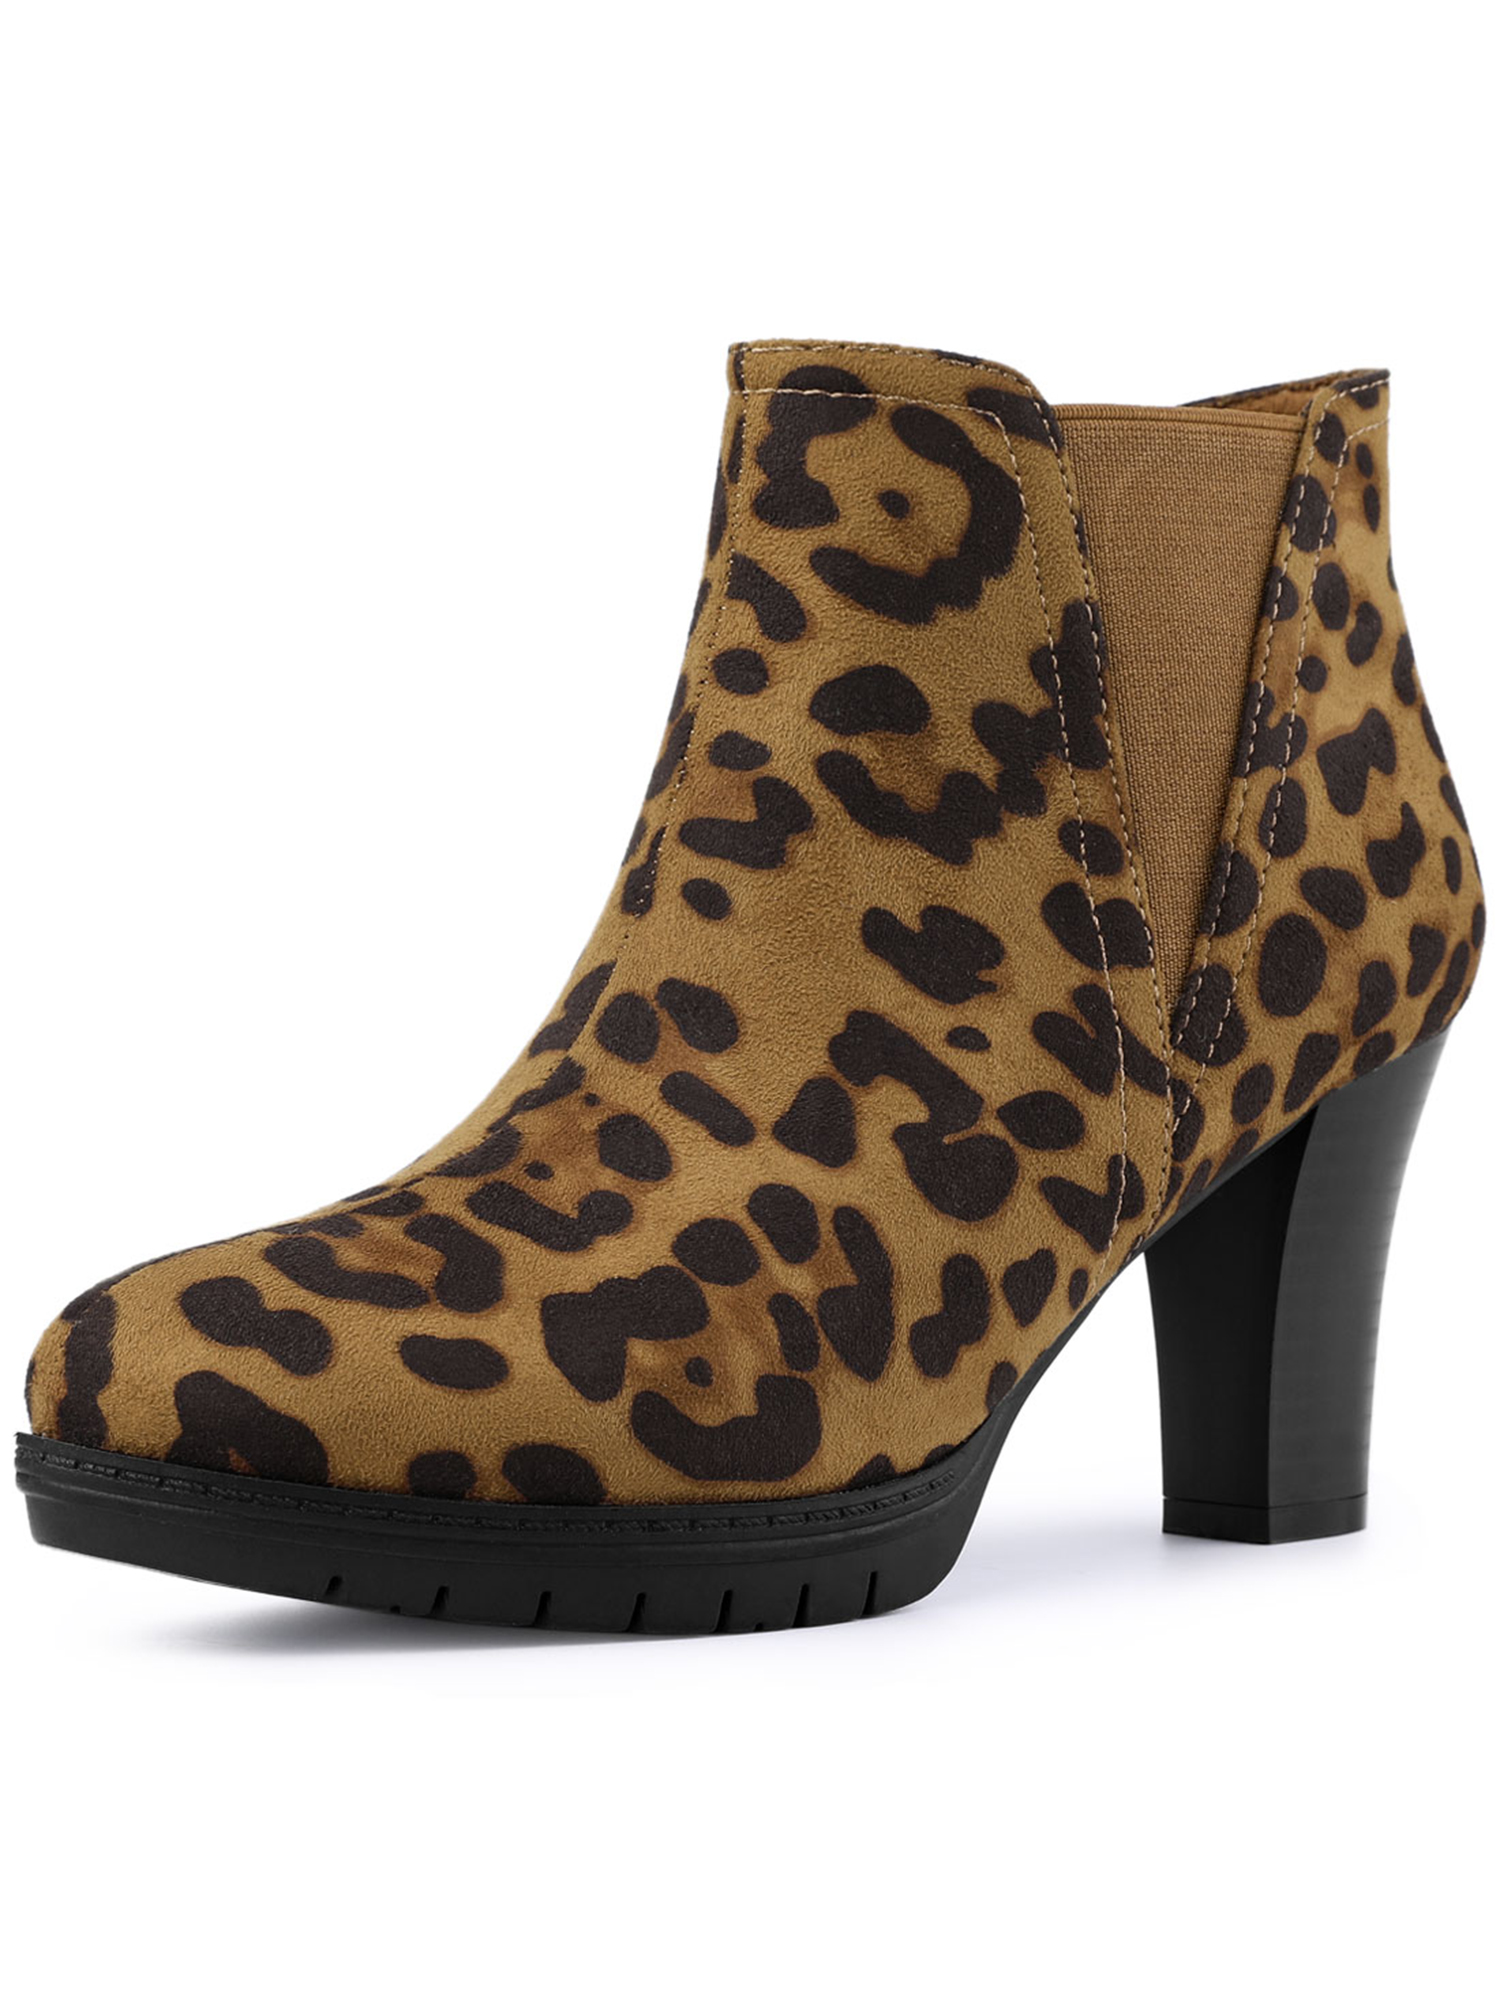 Details about  / Women Ladies Leopard Flat Ankle Boots Low Heel Casual Chelsea Booties Shoes Size